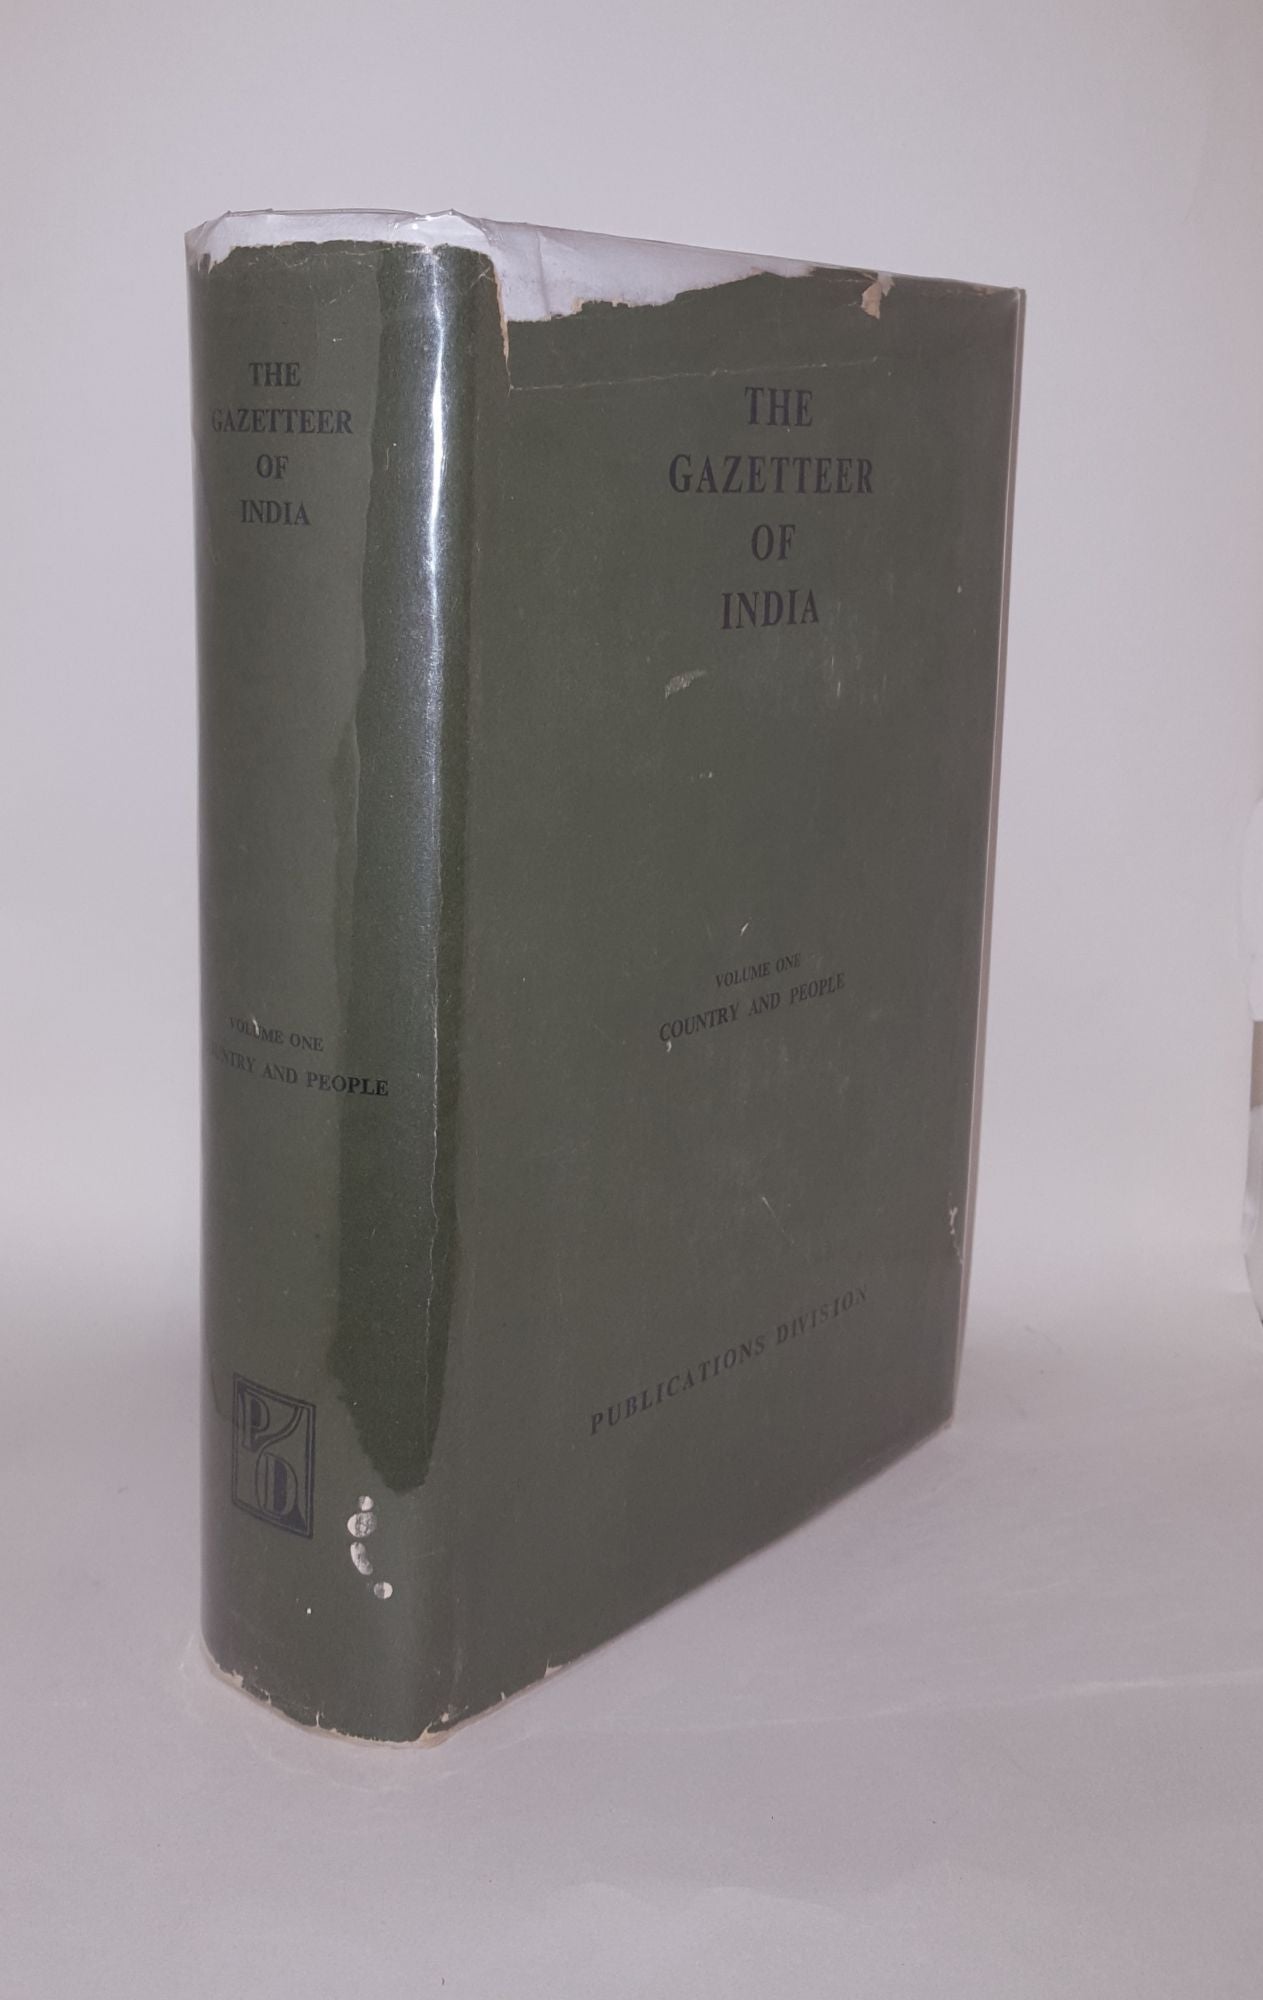 KABIR Humayun, Central Gazetters Unit Government Of India - The Gazetteer of India Indian Union Volume One Country and People